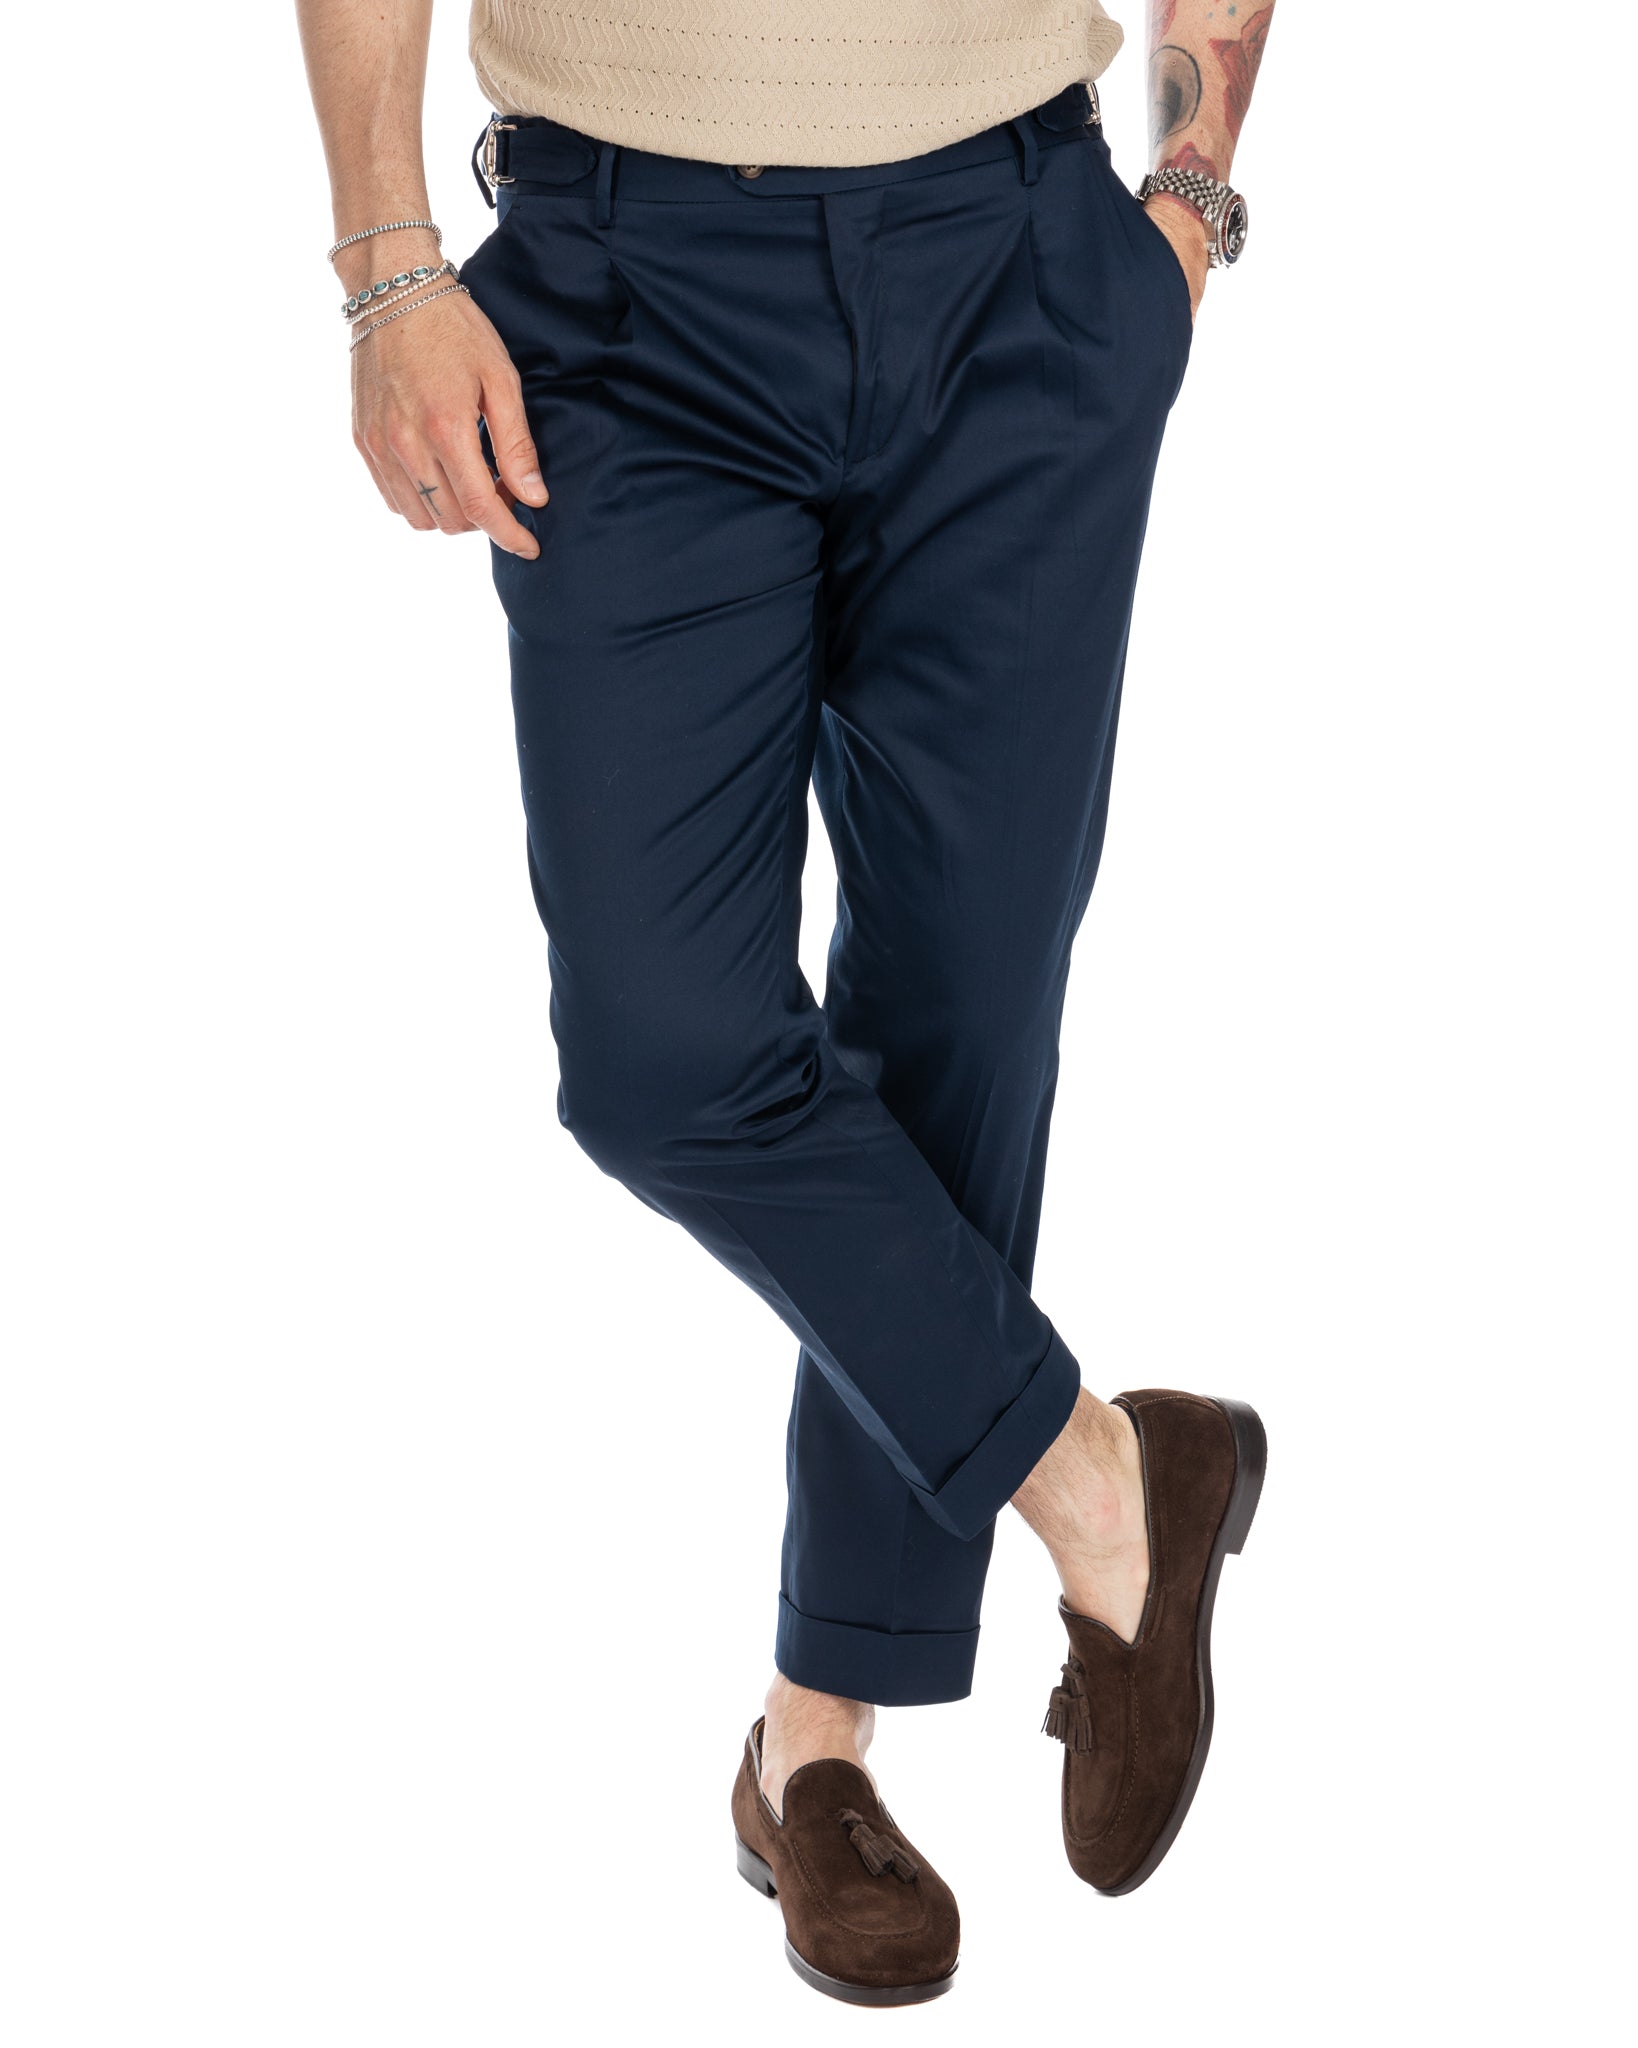 James - blue high-waisted trousers with buckles